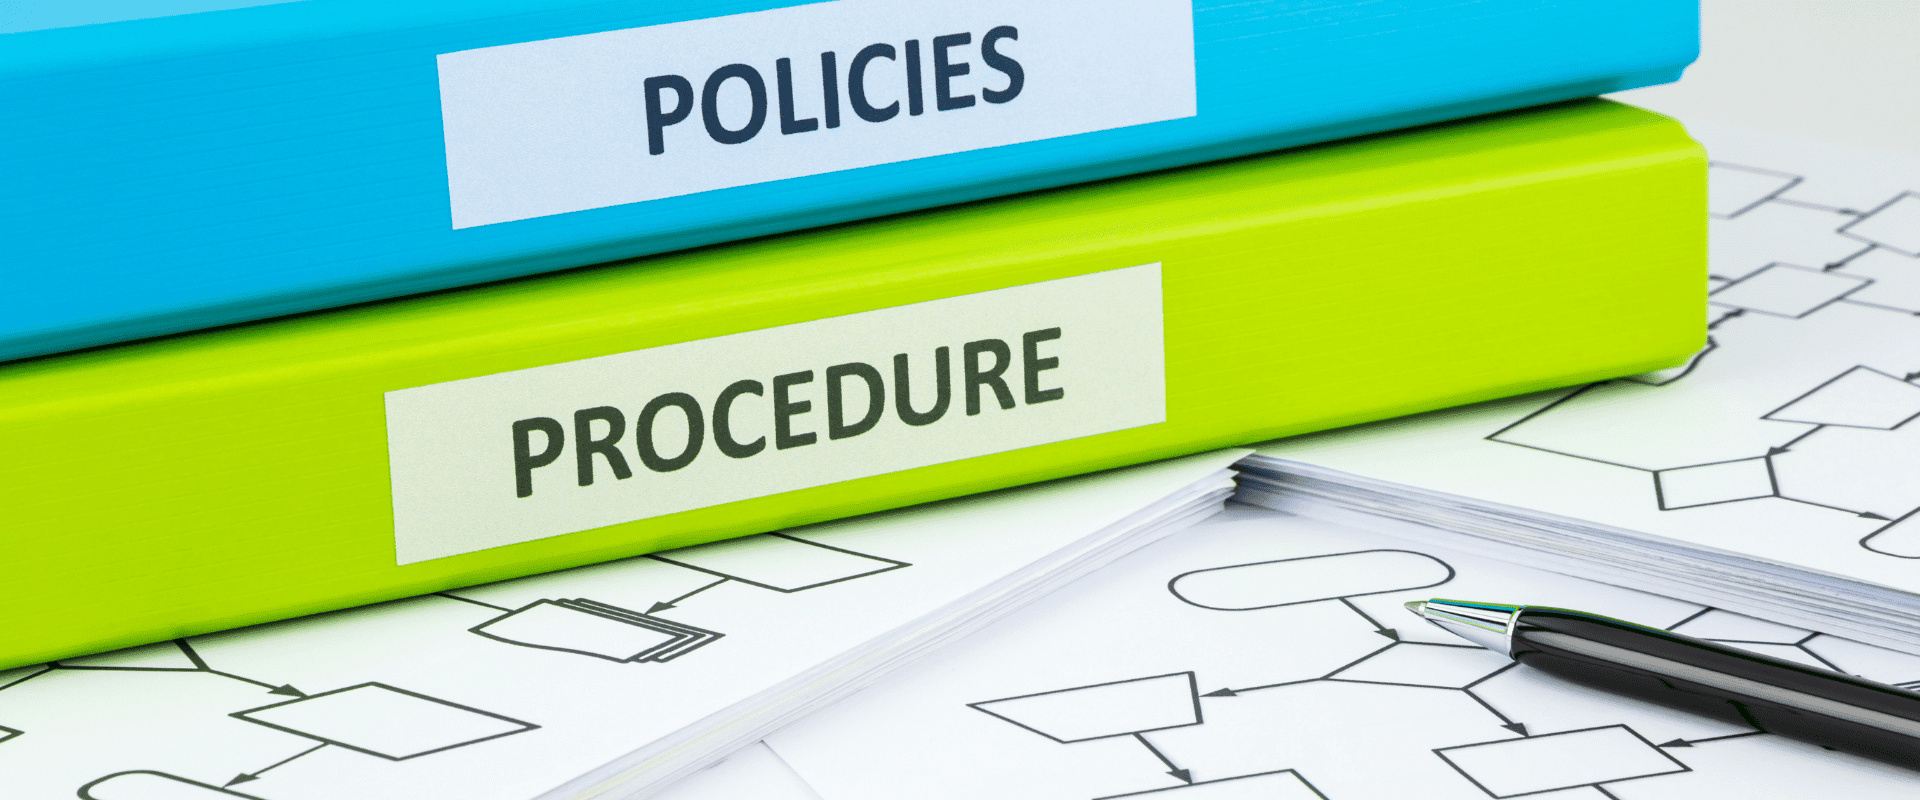 health and safety policies and procedures